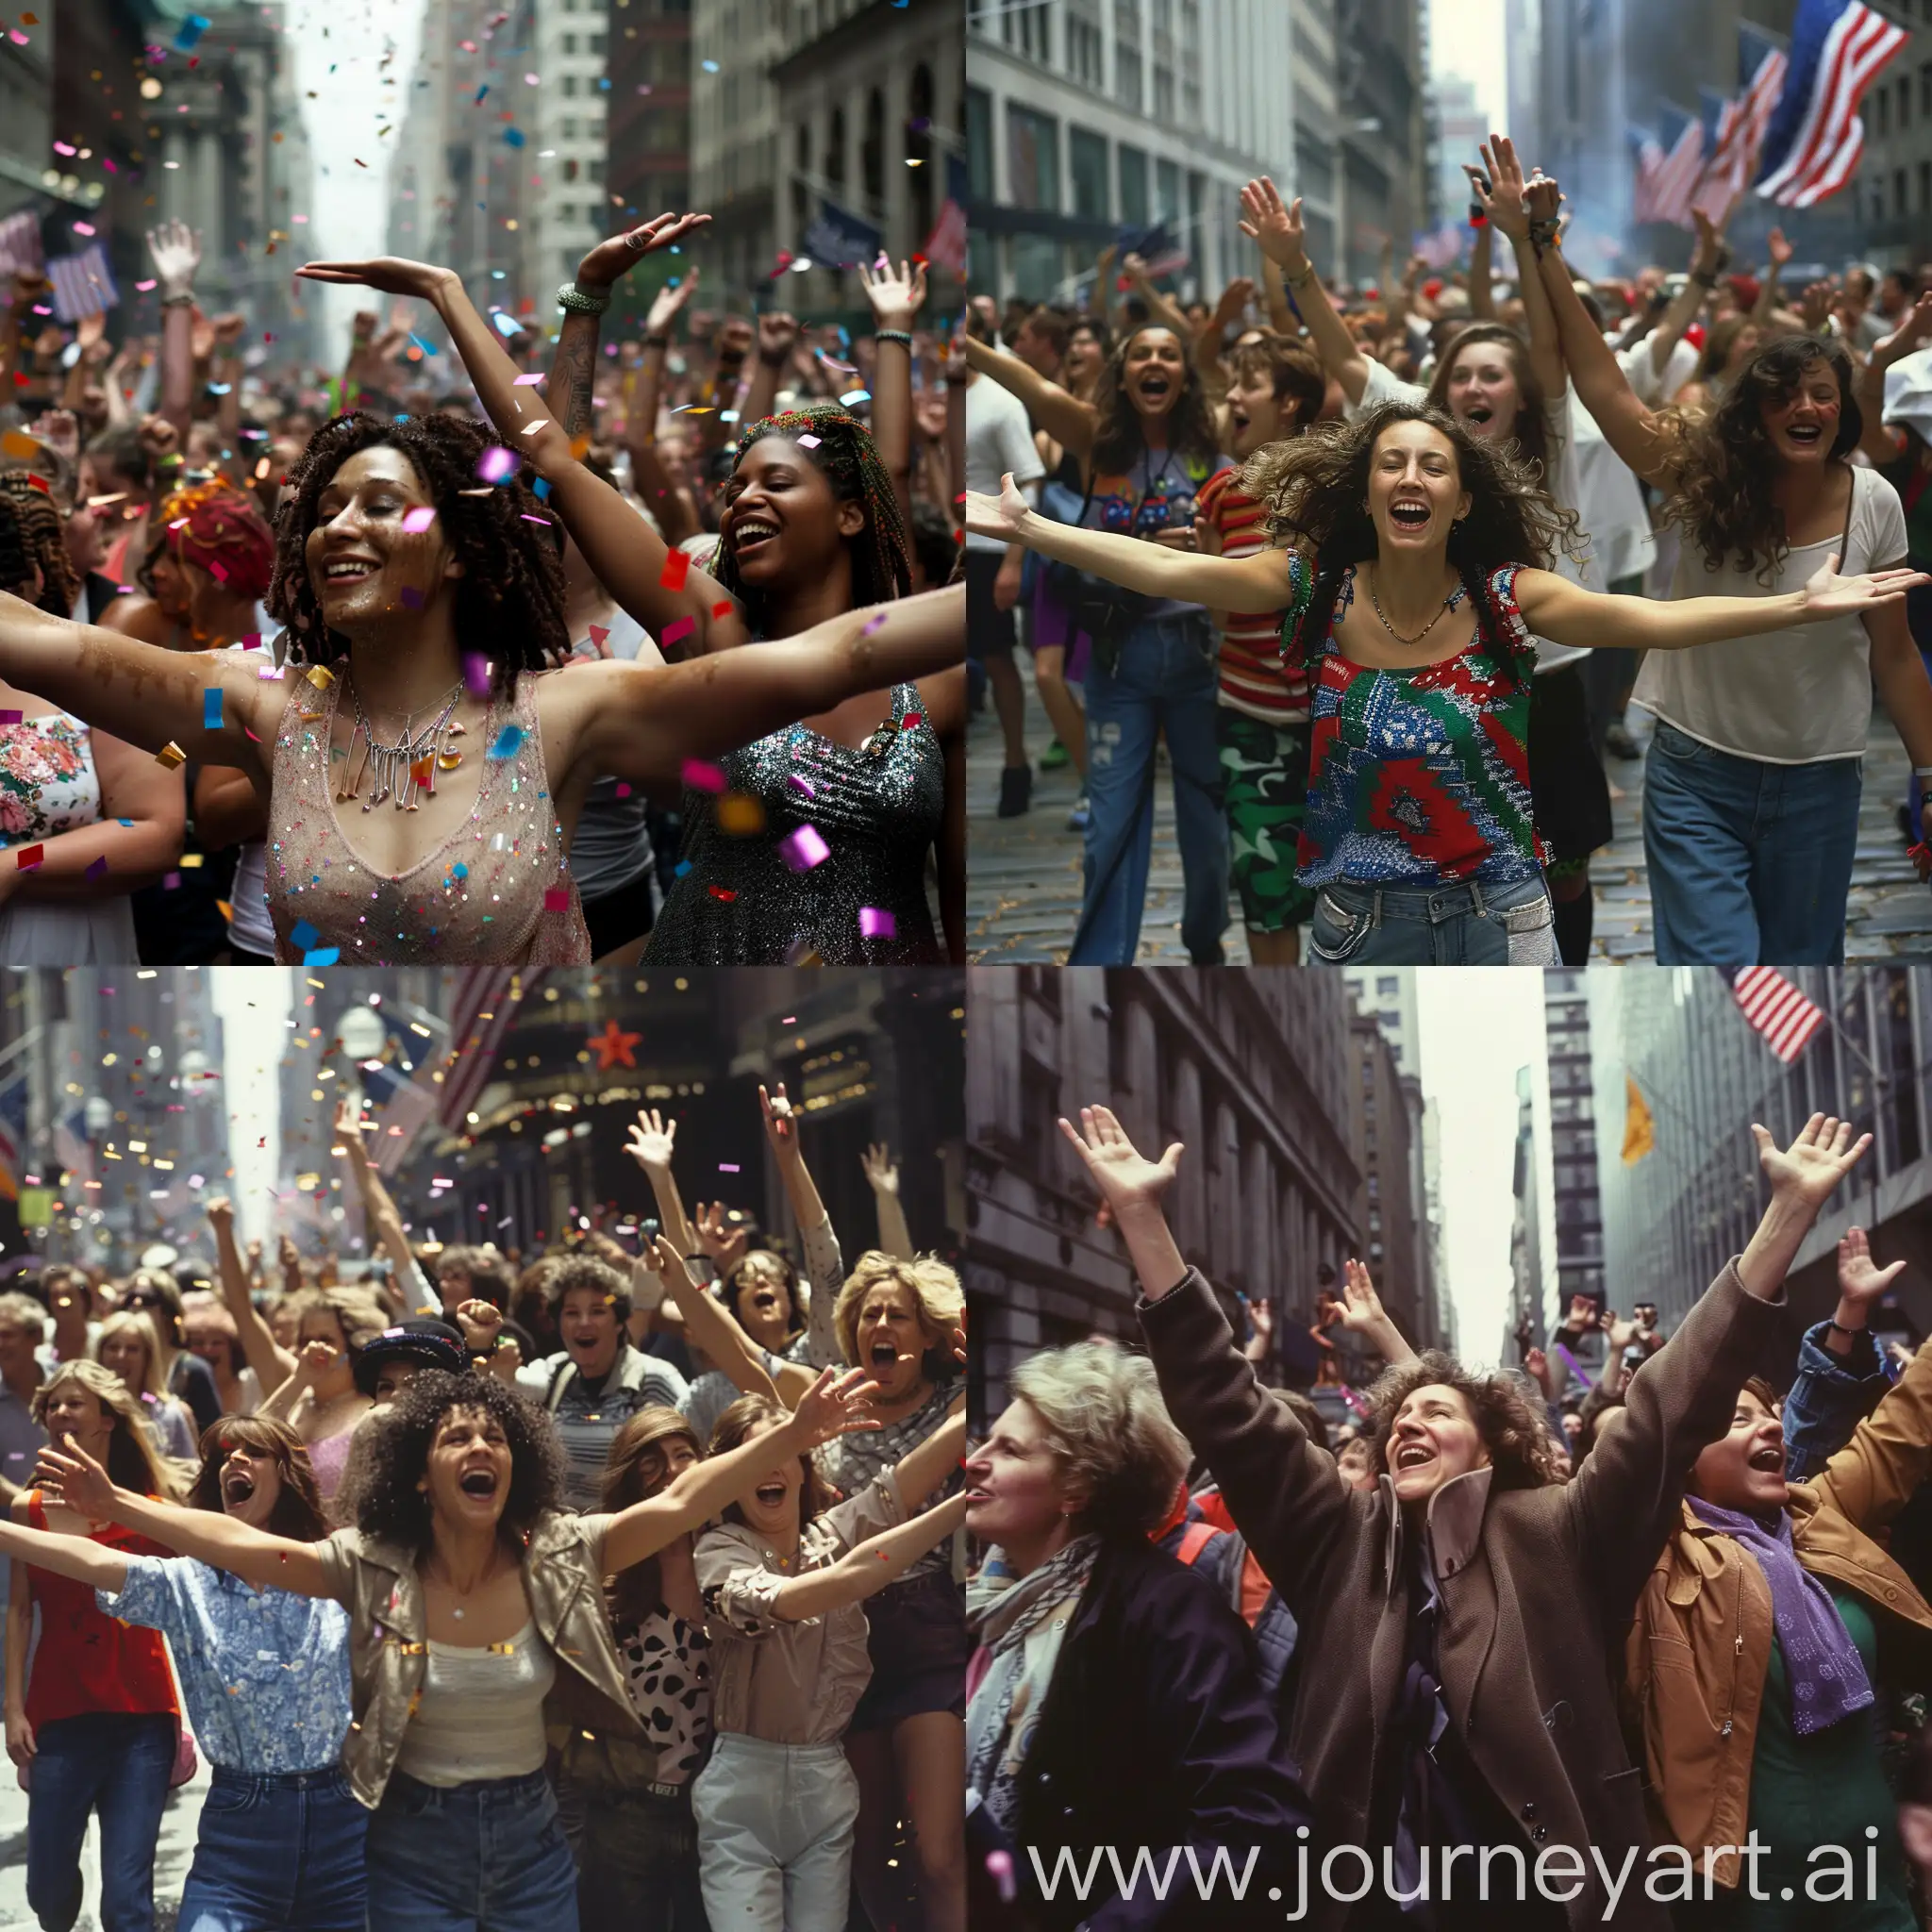 Celebrating-Women-with-Outstretched-Arms-in-American-Streets